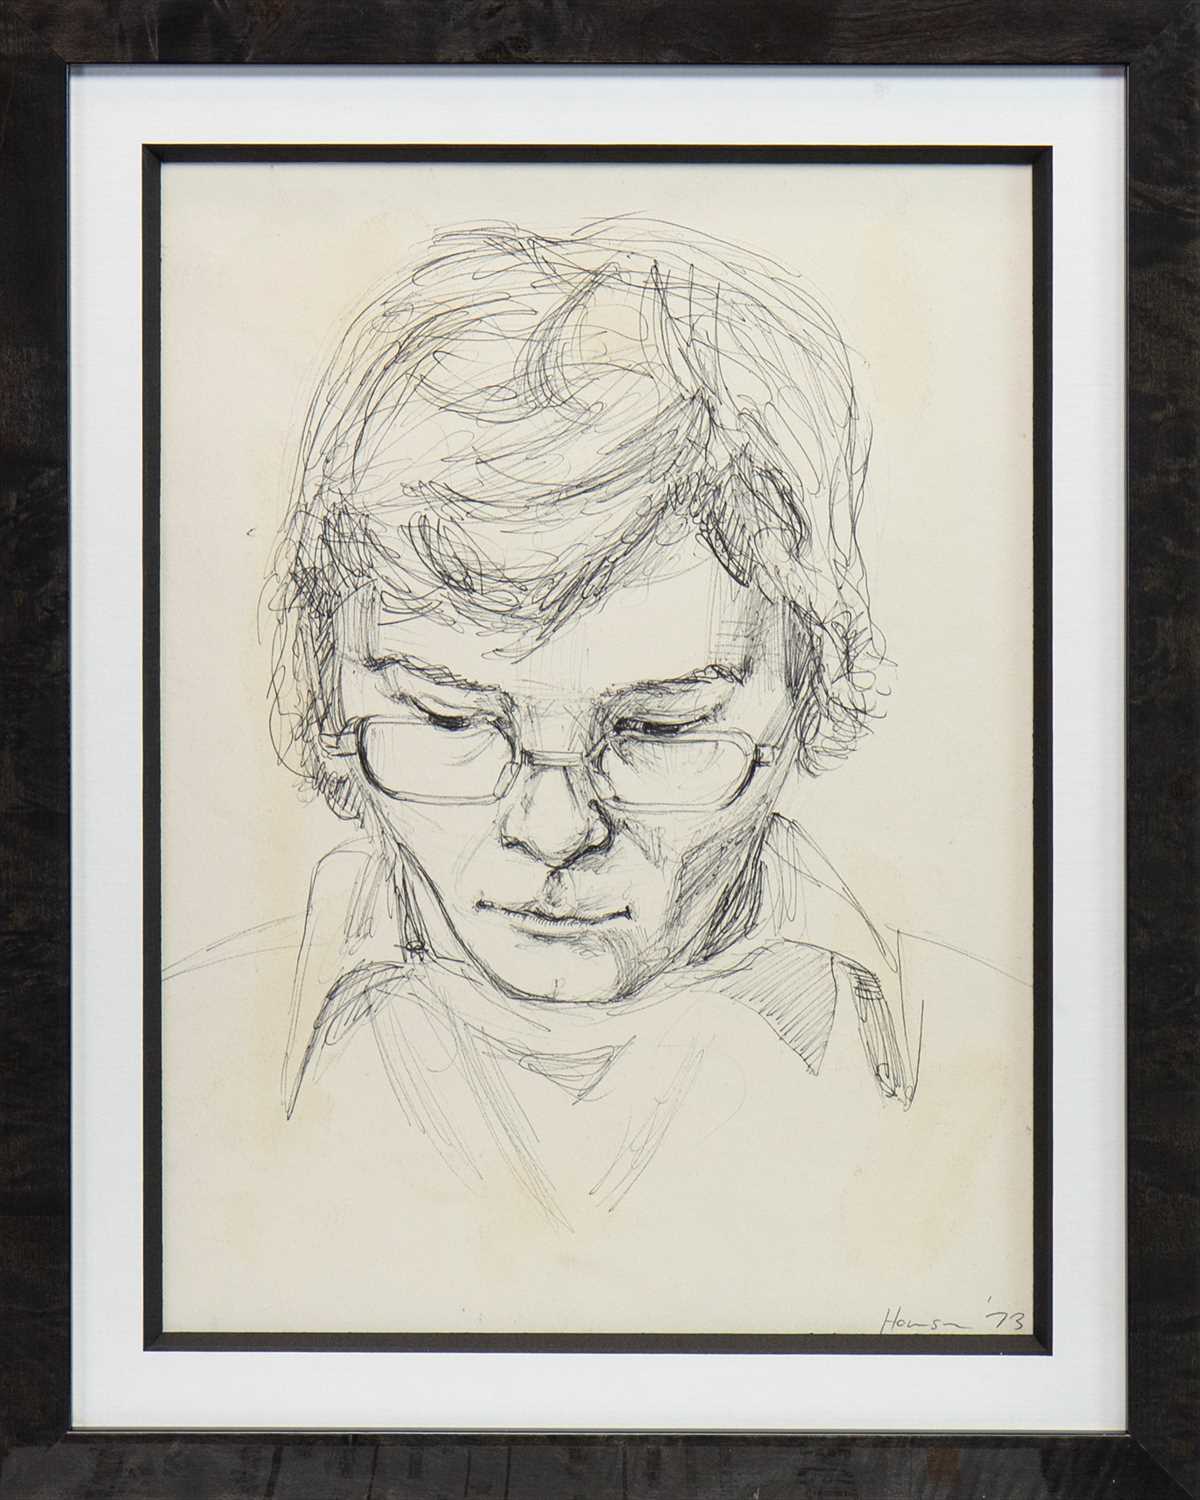 Lot 164 - BOY A, AN EARLY BIRO SKETCH BY PETER HOWSON